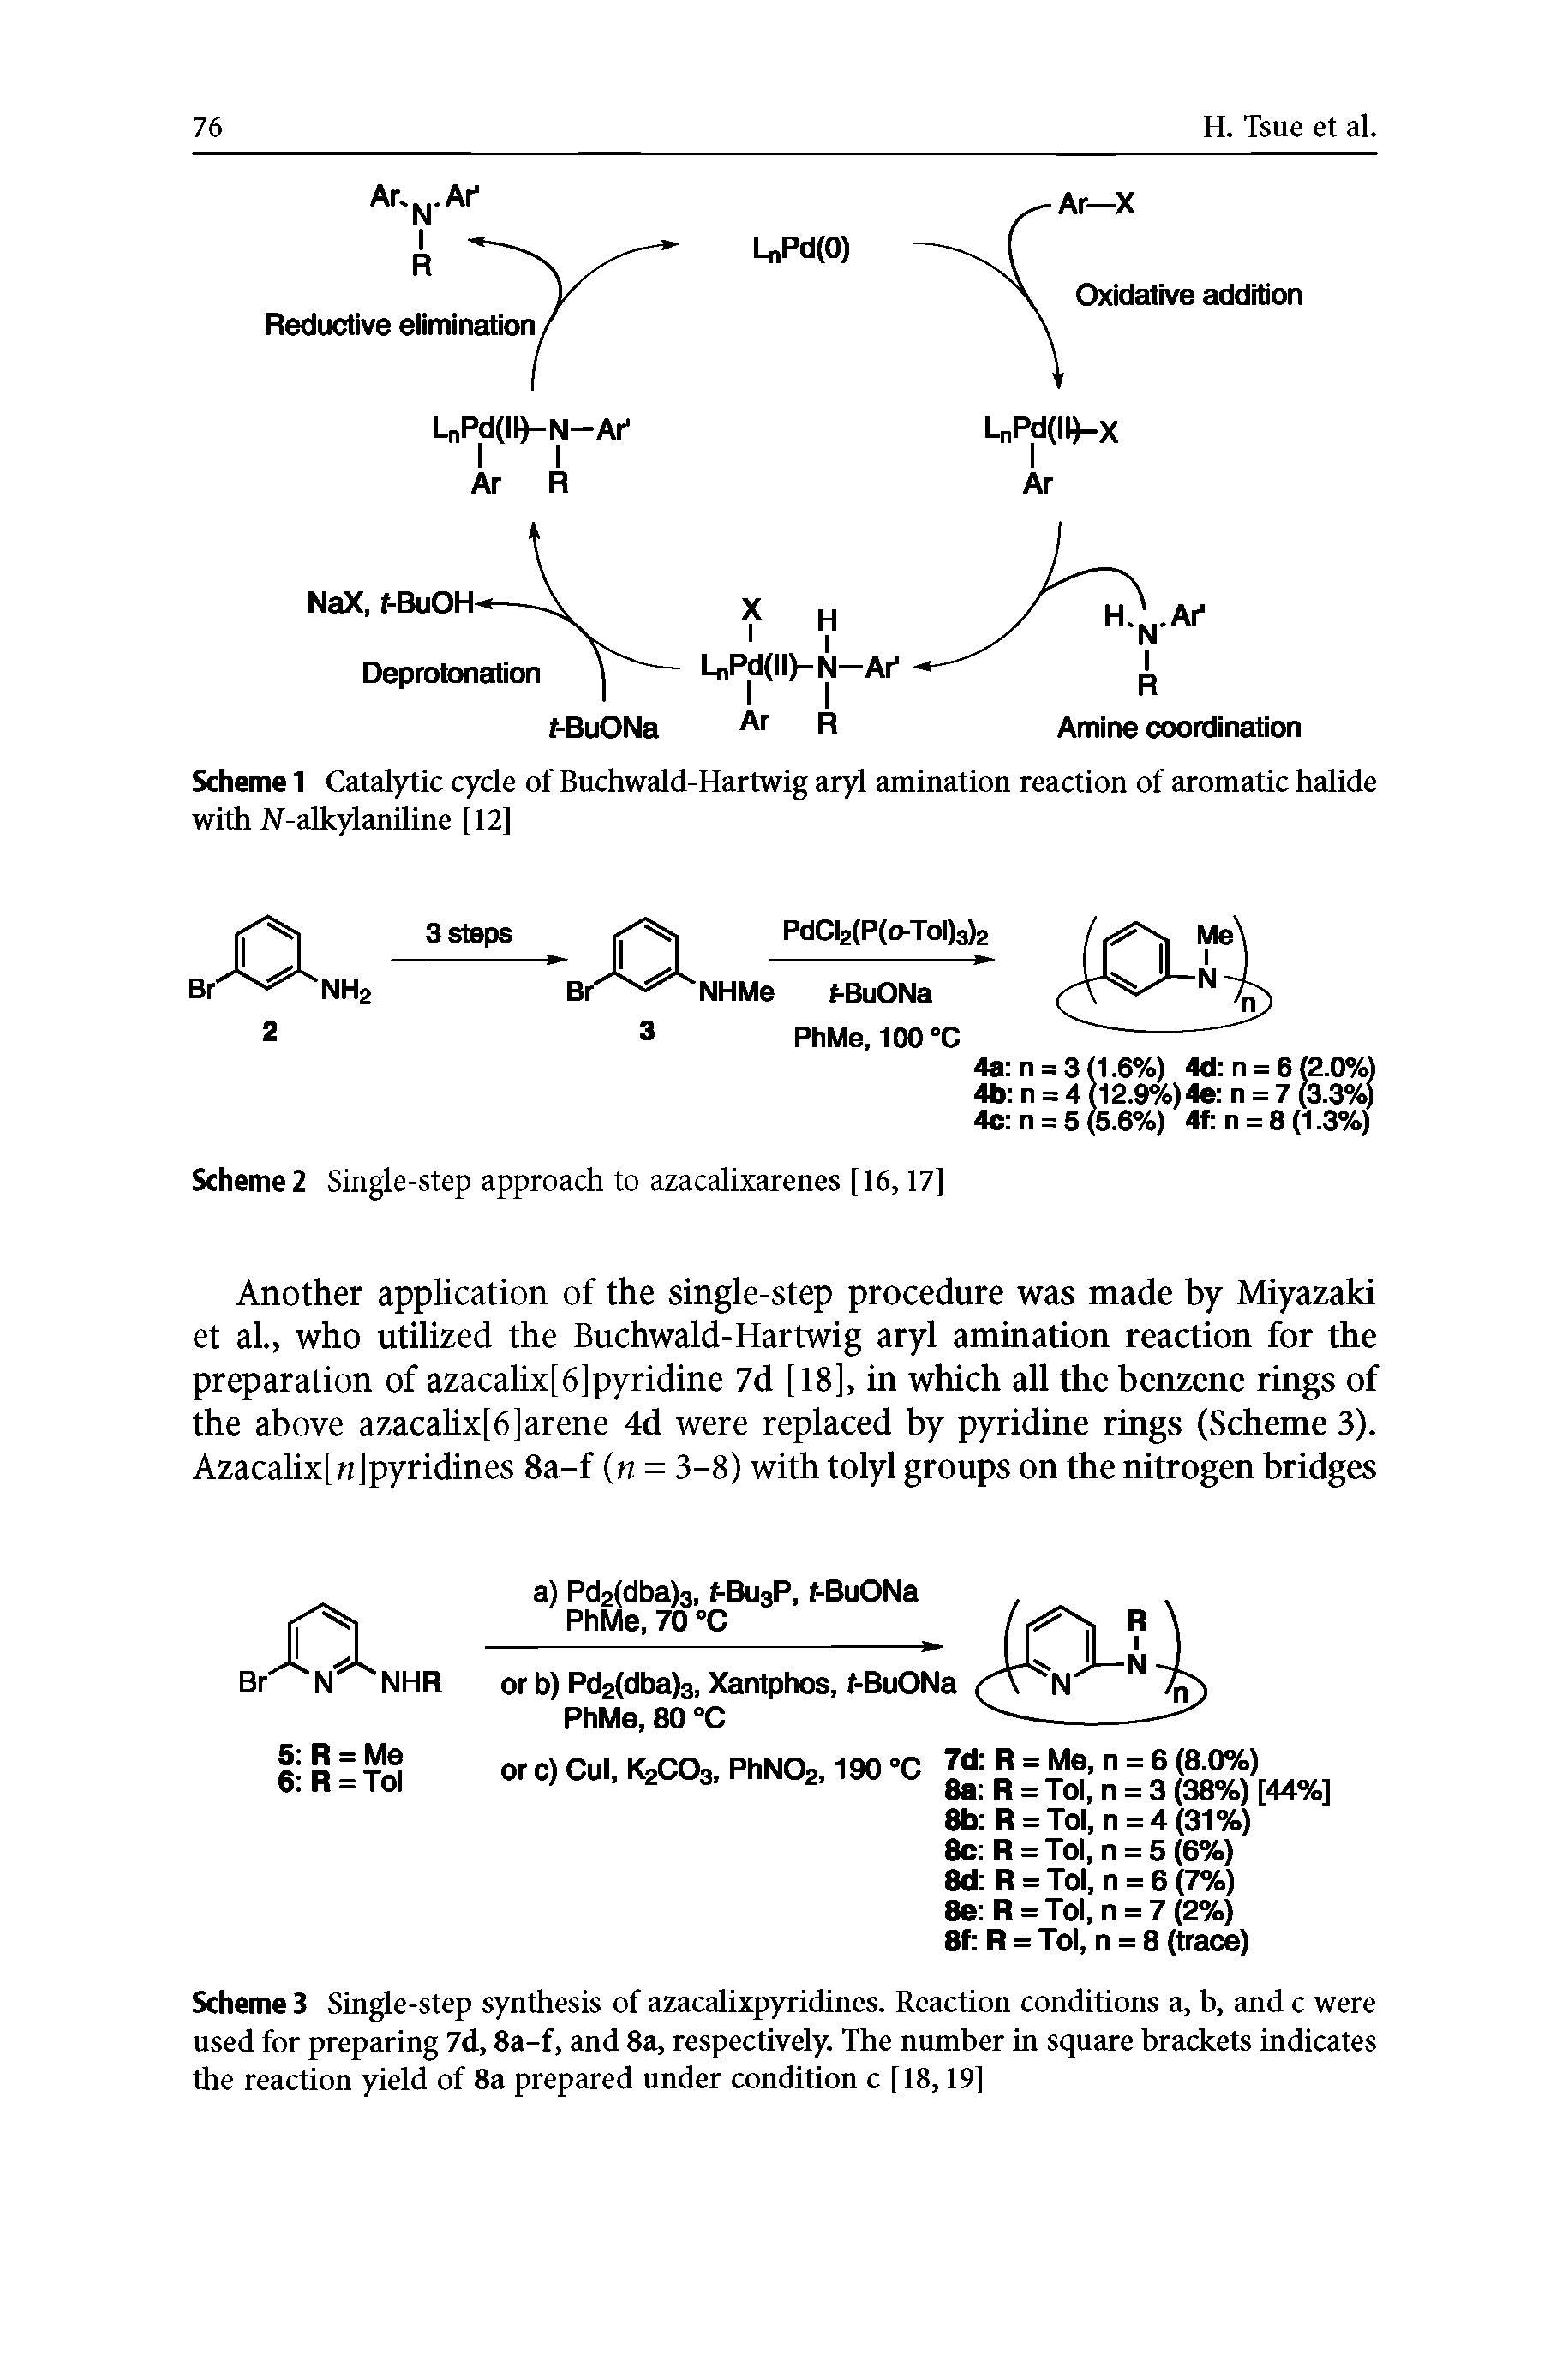 Scheme 1 Catalytic cyde of Buchwald-Hartwig aryl amination reaction of aromatic halide with N-alkylanUine [12]...